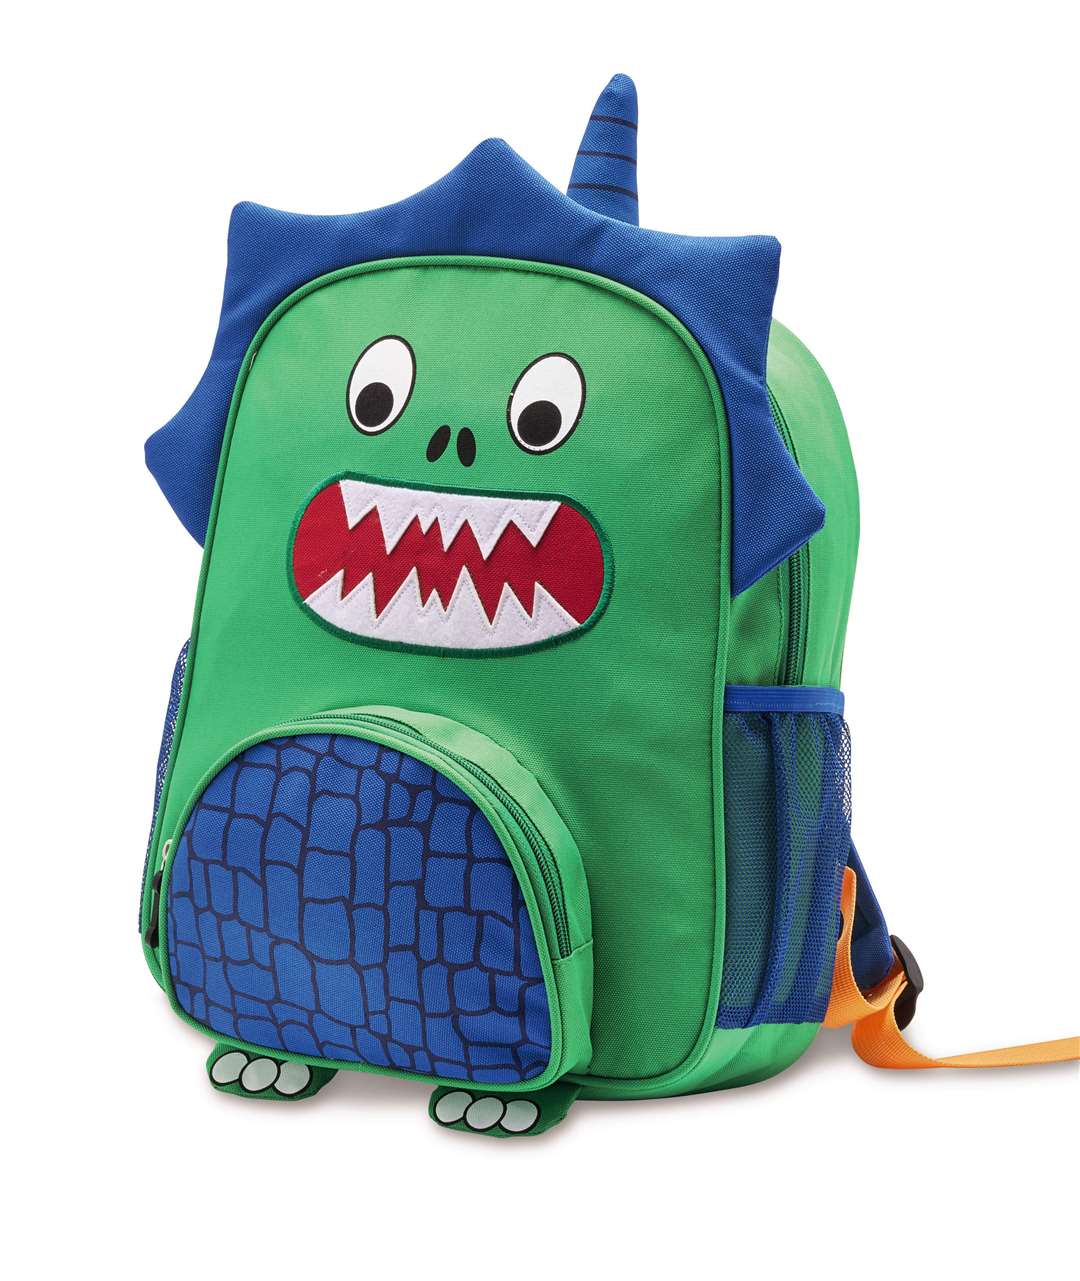 If you're in need of a childrenswear bargain, get yourself down to Aldi, where you can find a wealth of kids' clothing at bargain prices. Perfect for the holidays, this cute Dinosaur Backpack is a snip at £7.99